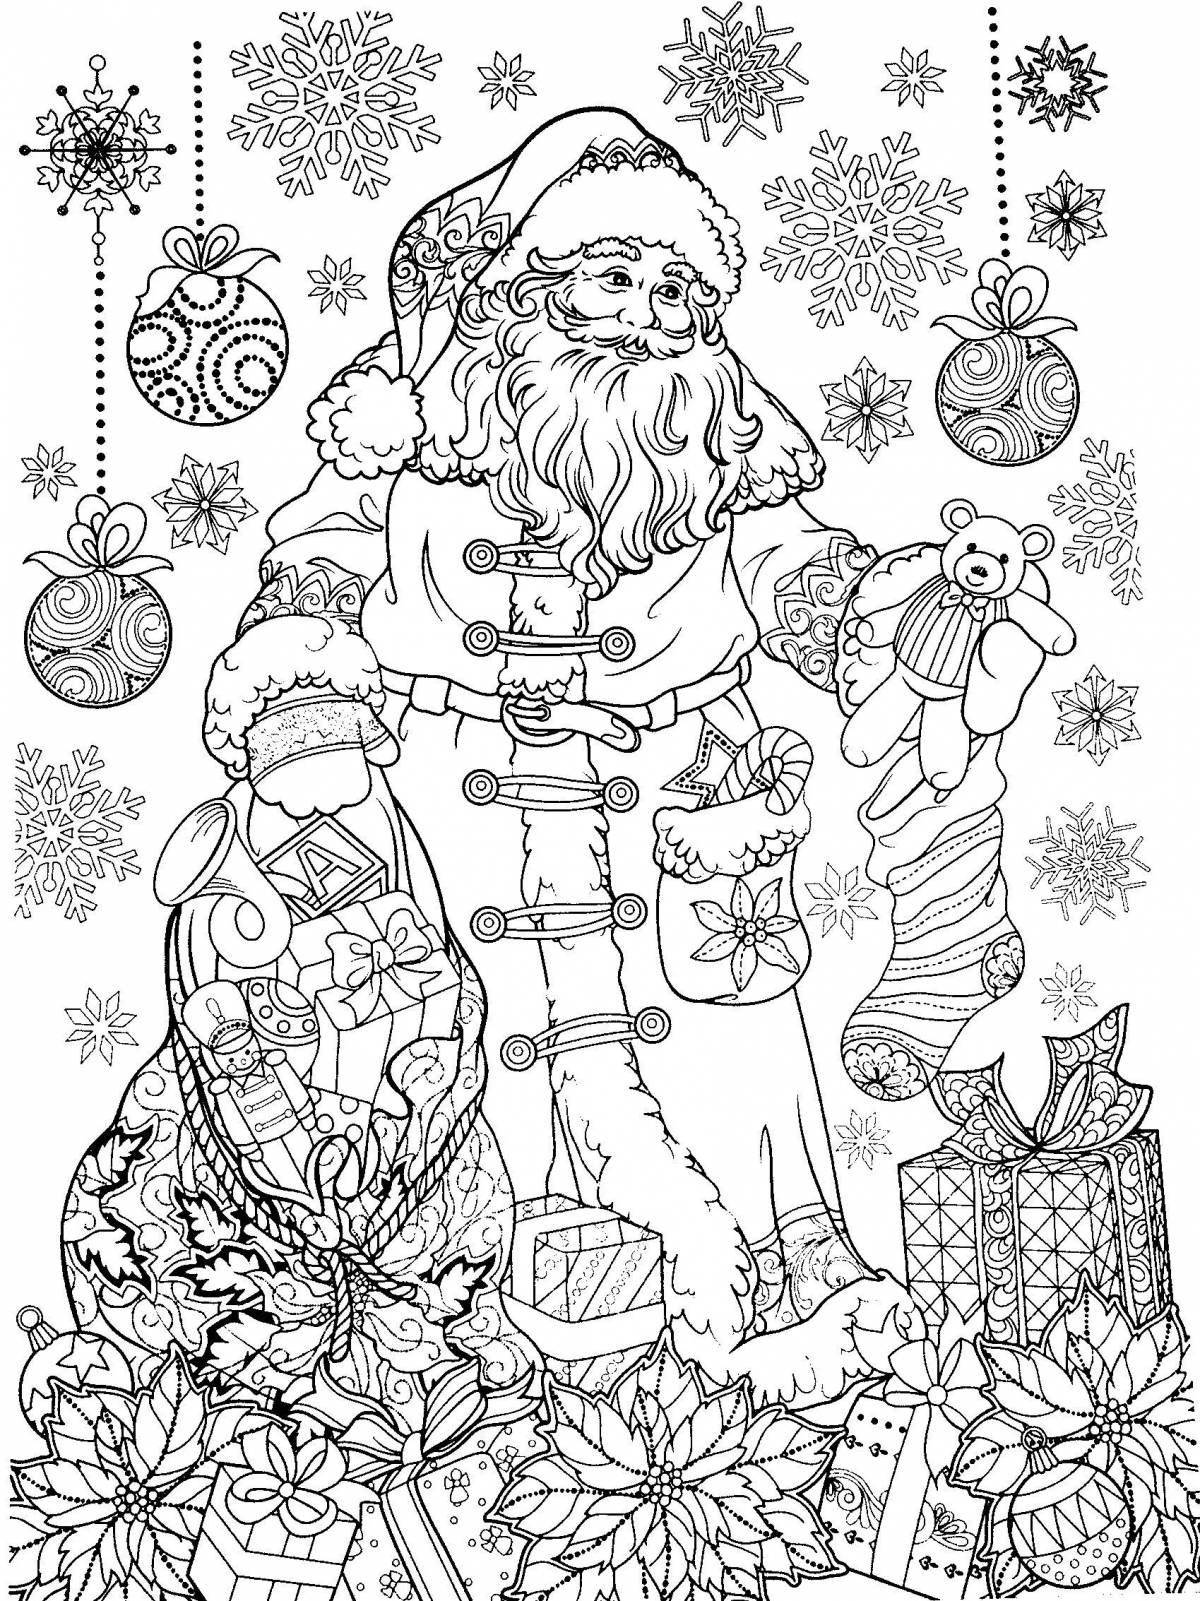 Exquisite frost coloring book for kids